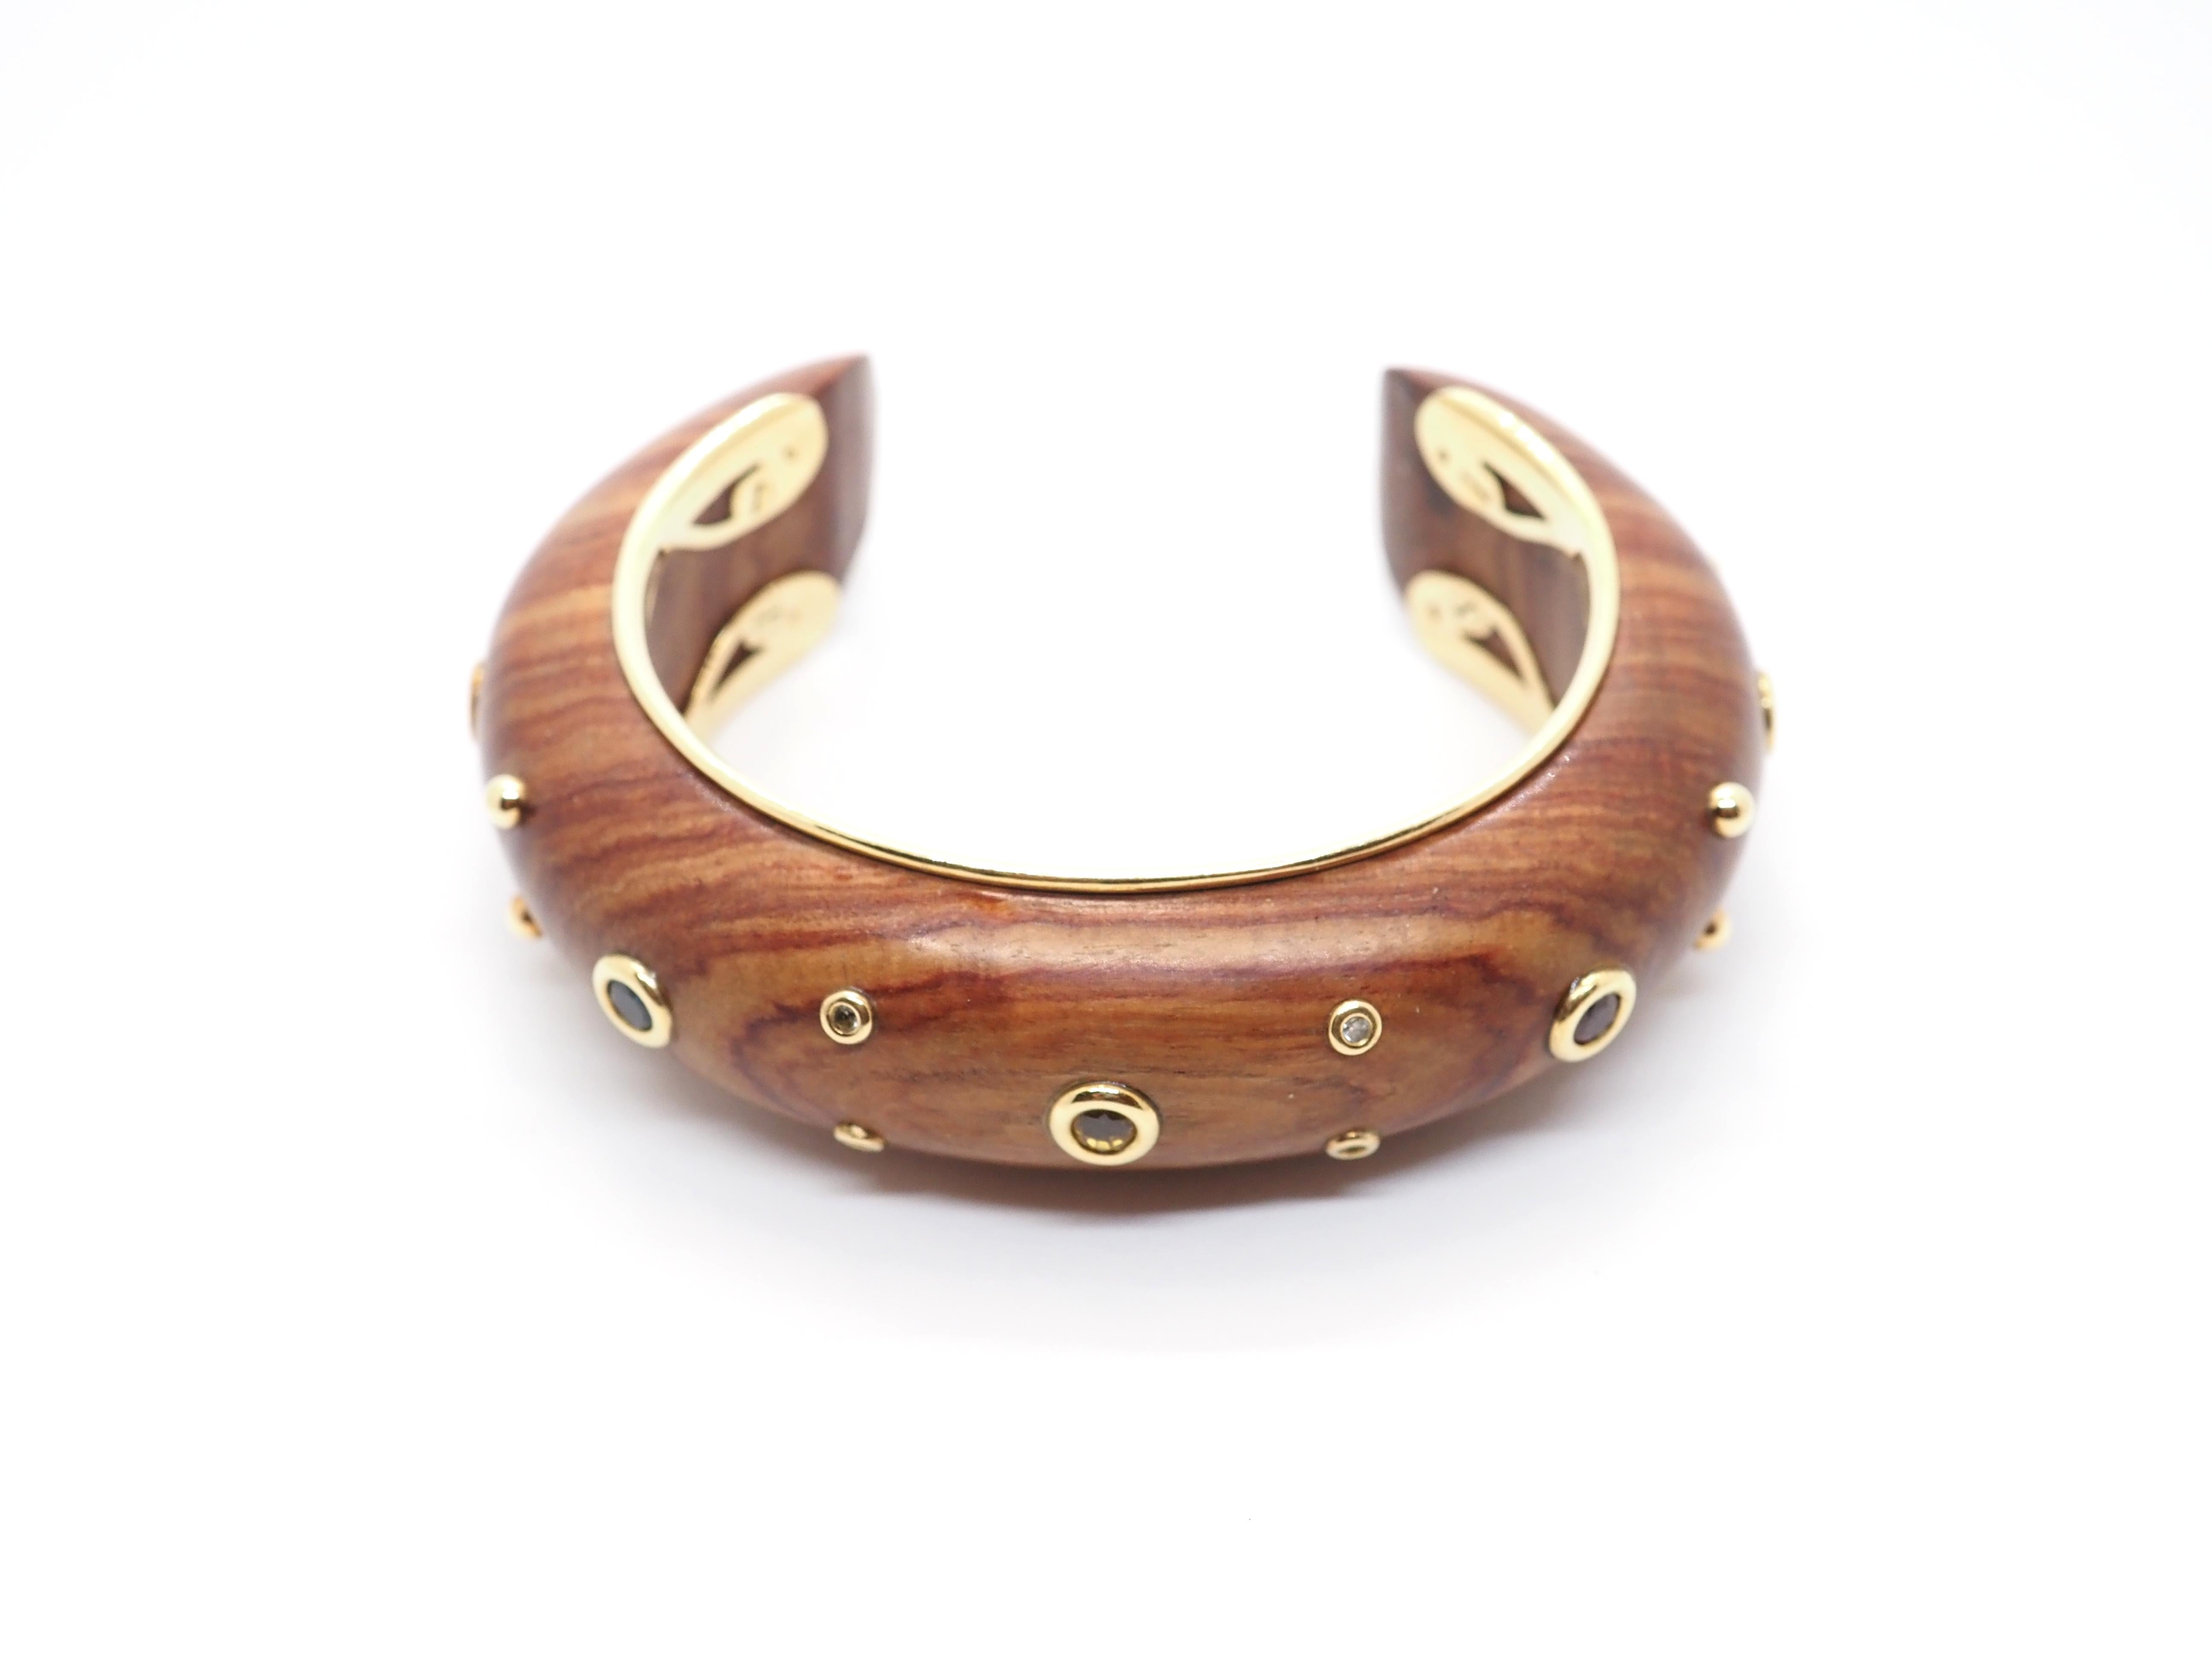 Original set of earrings, ring and bracelet  signed by Rene Boivin, made in wood, yellow gold and different gem stones.  
Cuff bracelet in wood surrounded by 2 lines of gold,  decorated with two round cut emeralds, of 2.70mm each, one round cut 